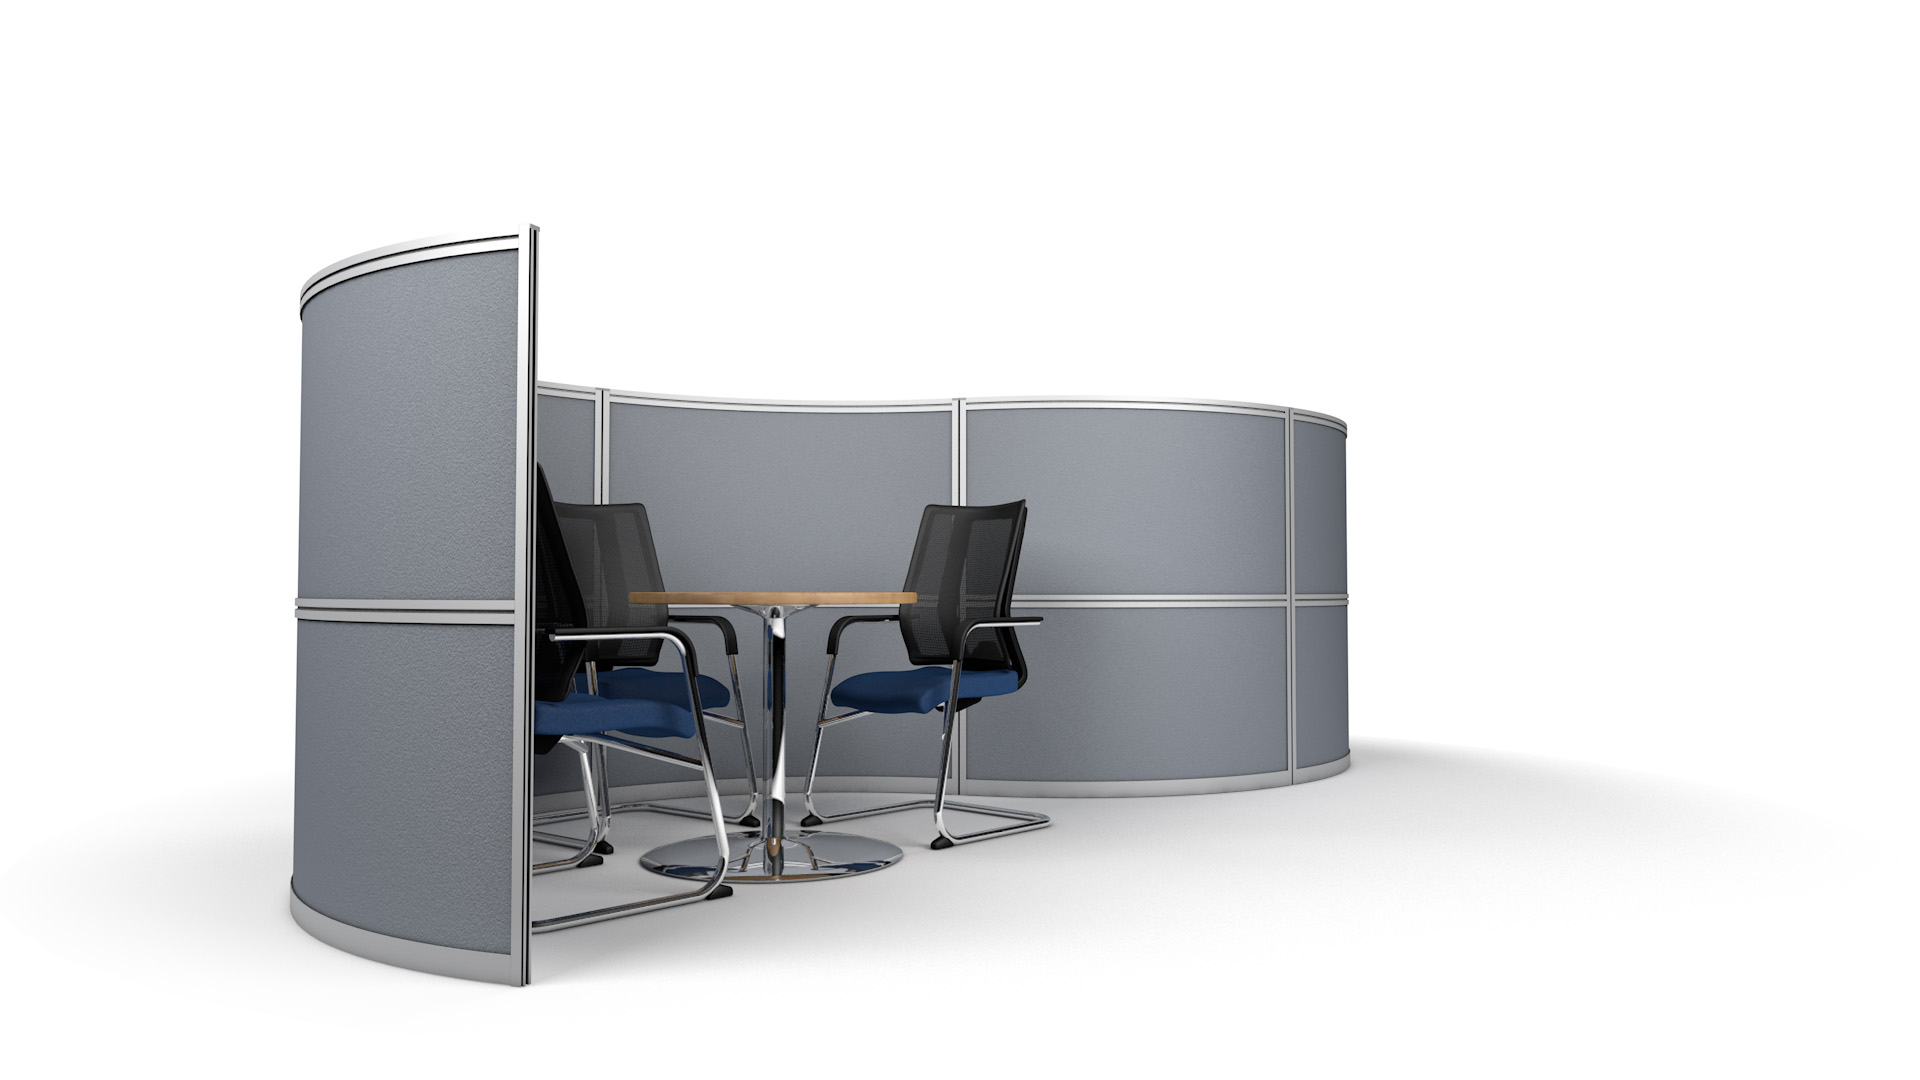 S-Shape Curved Office Screen Pod - Ideal For Open Plan Offices and Canteens